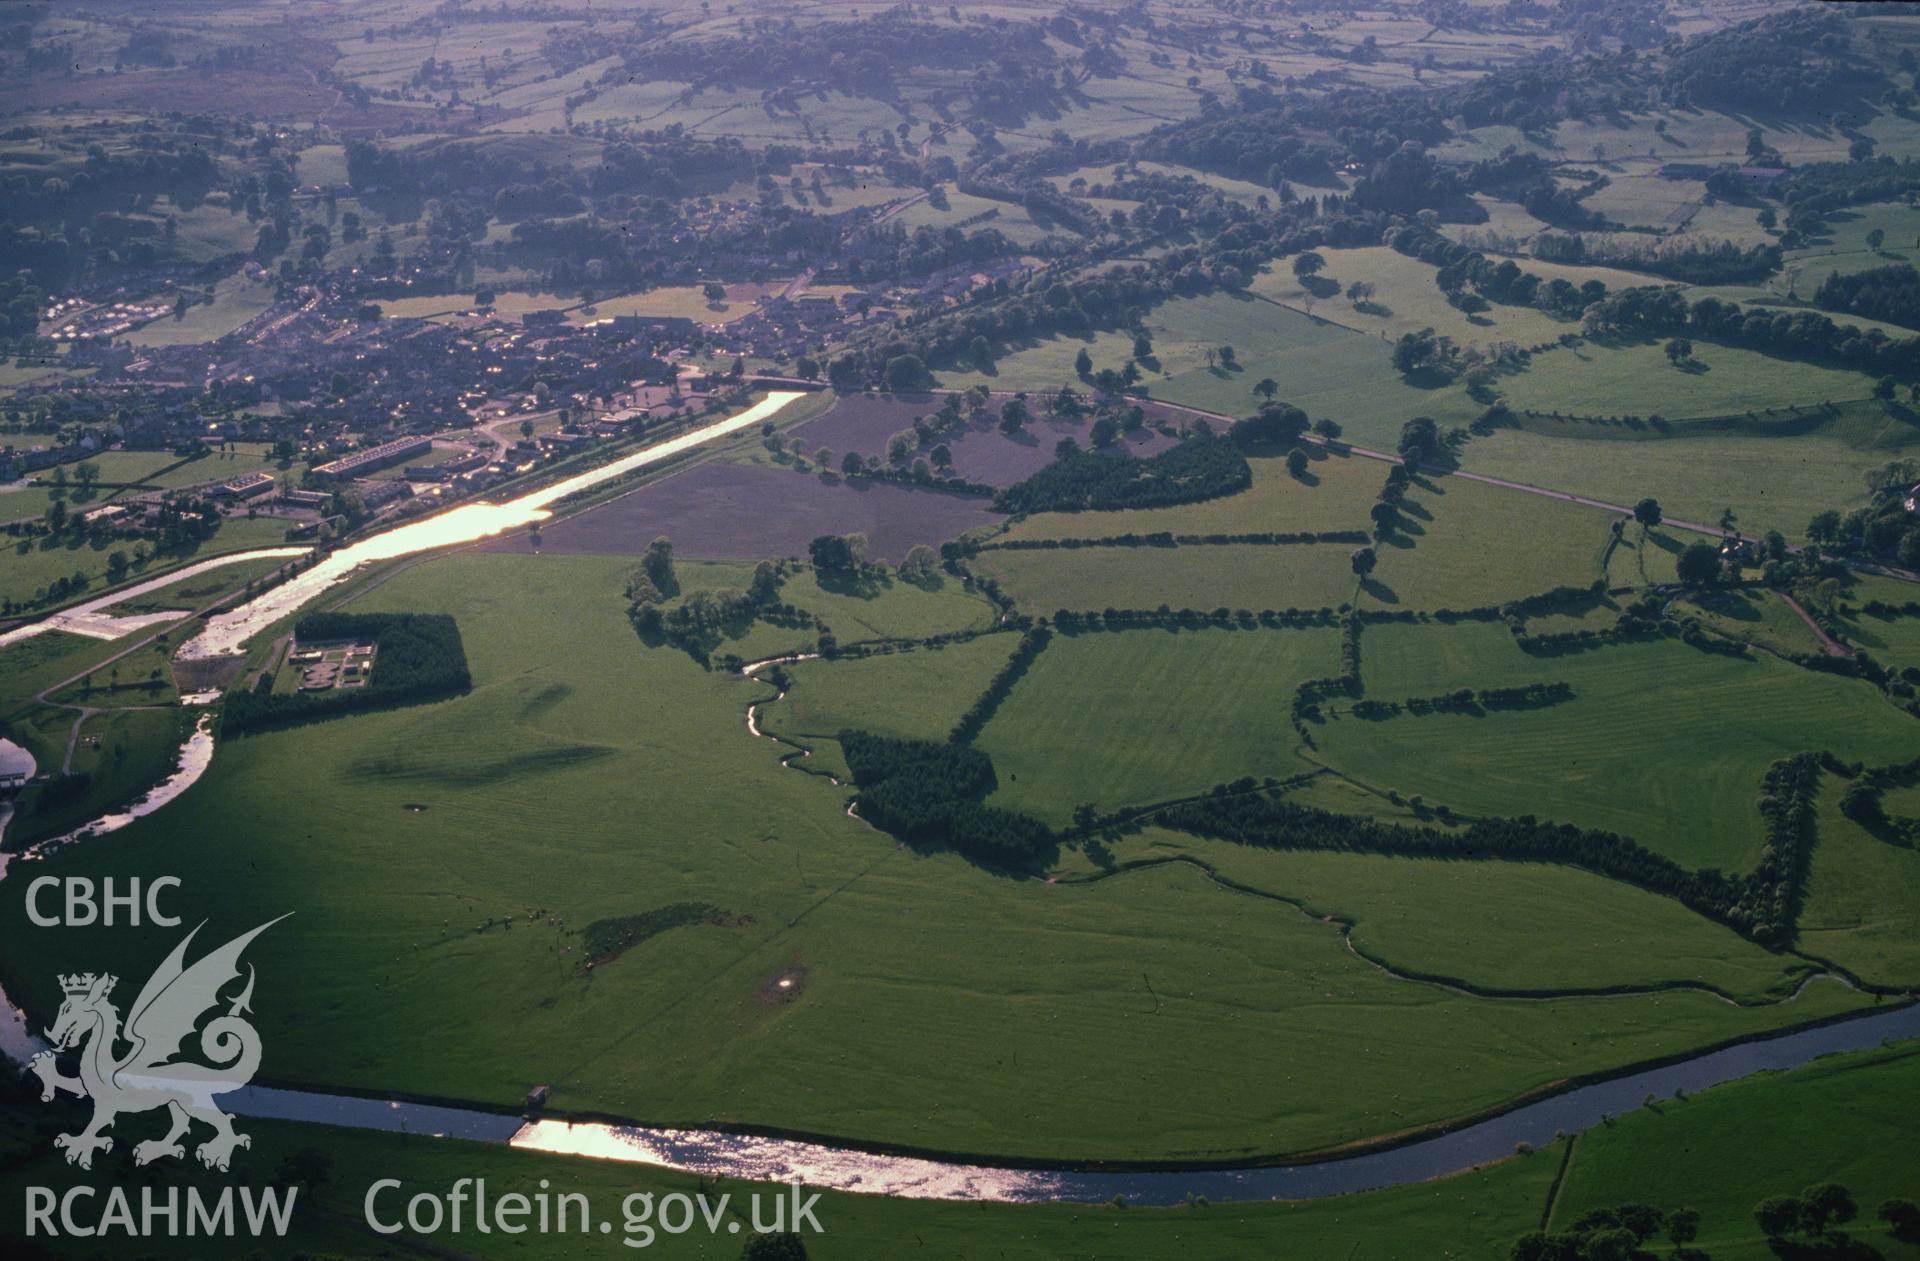 Slide of RCAHMW colour oblique aerial photograph of Llanfor Roman Forts, taken by C.R. Musson, 7/6/1989.